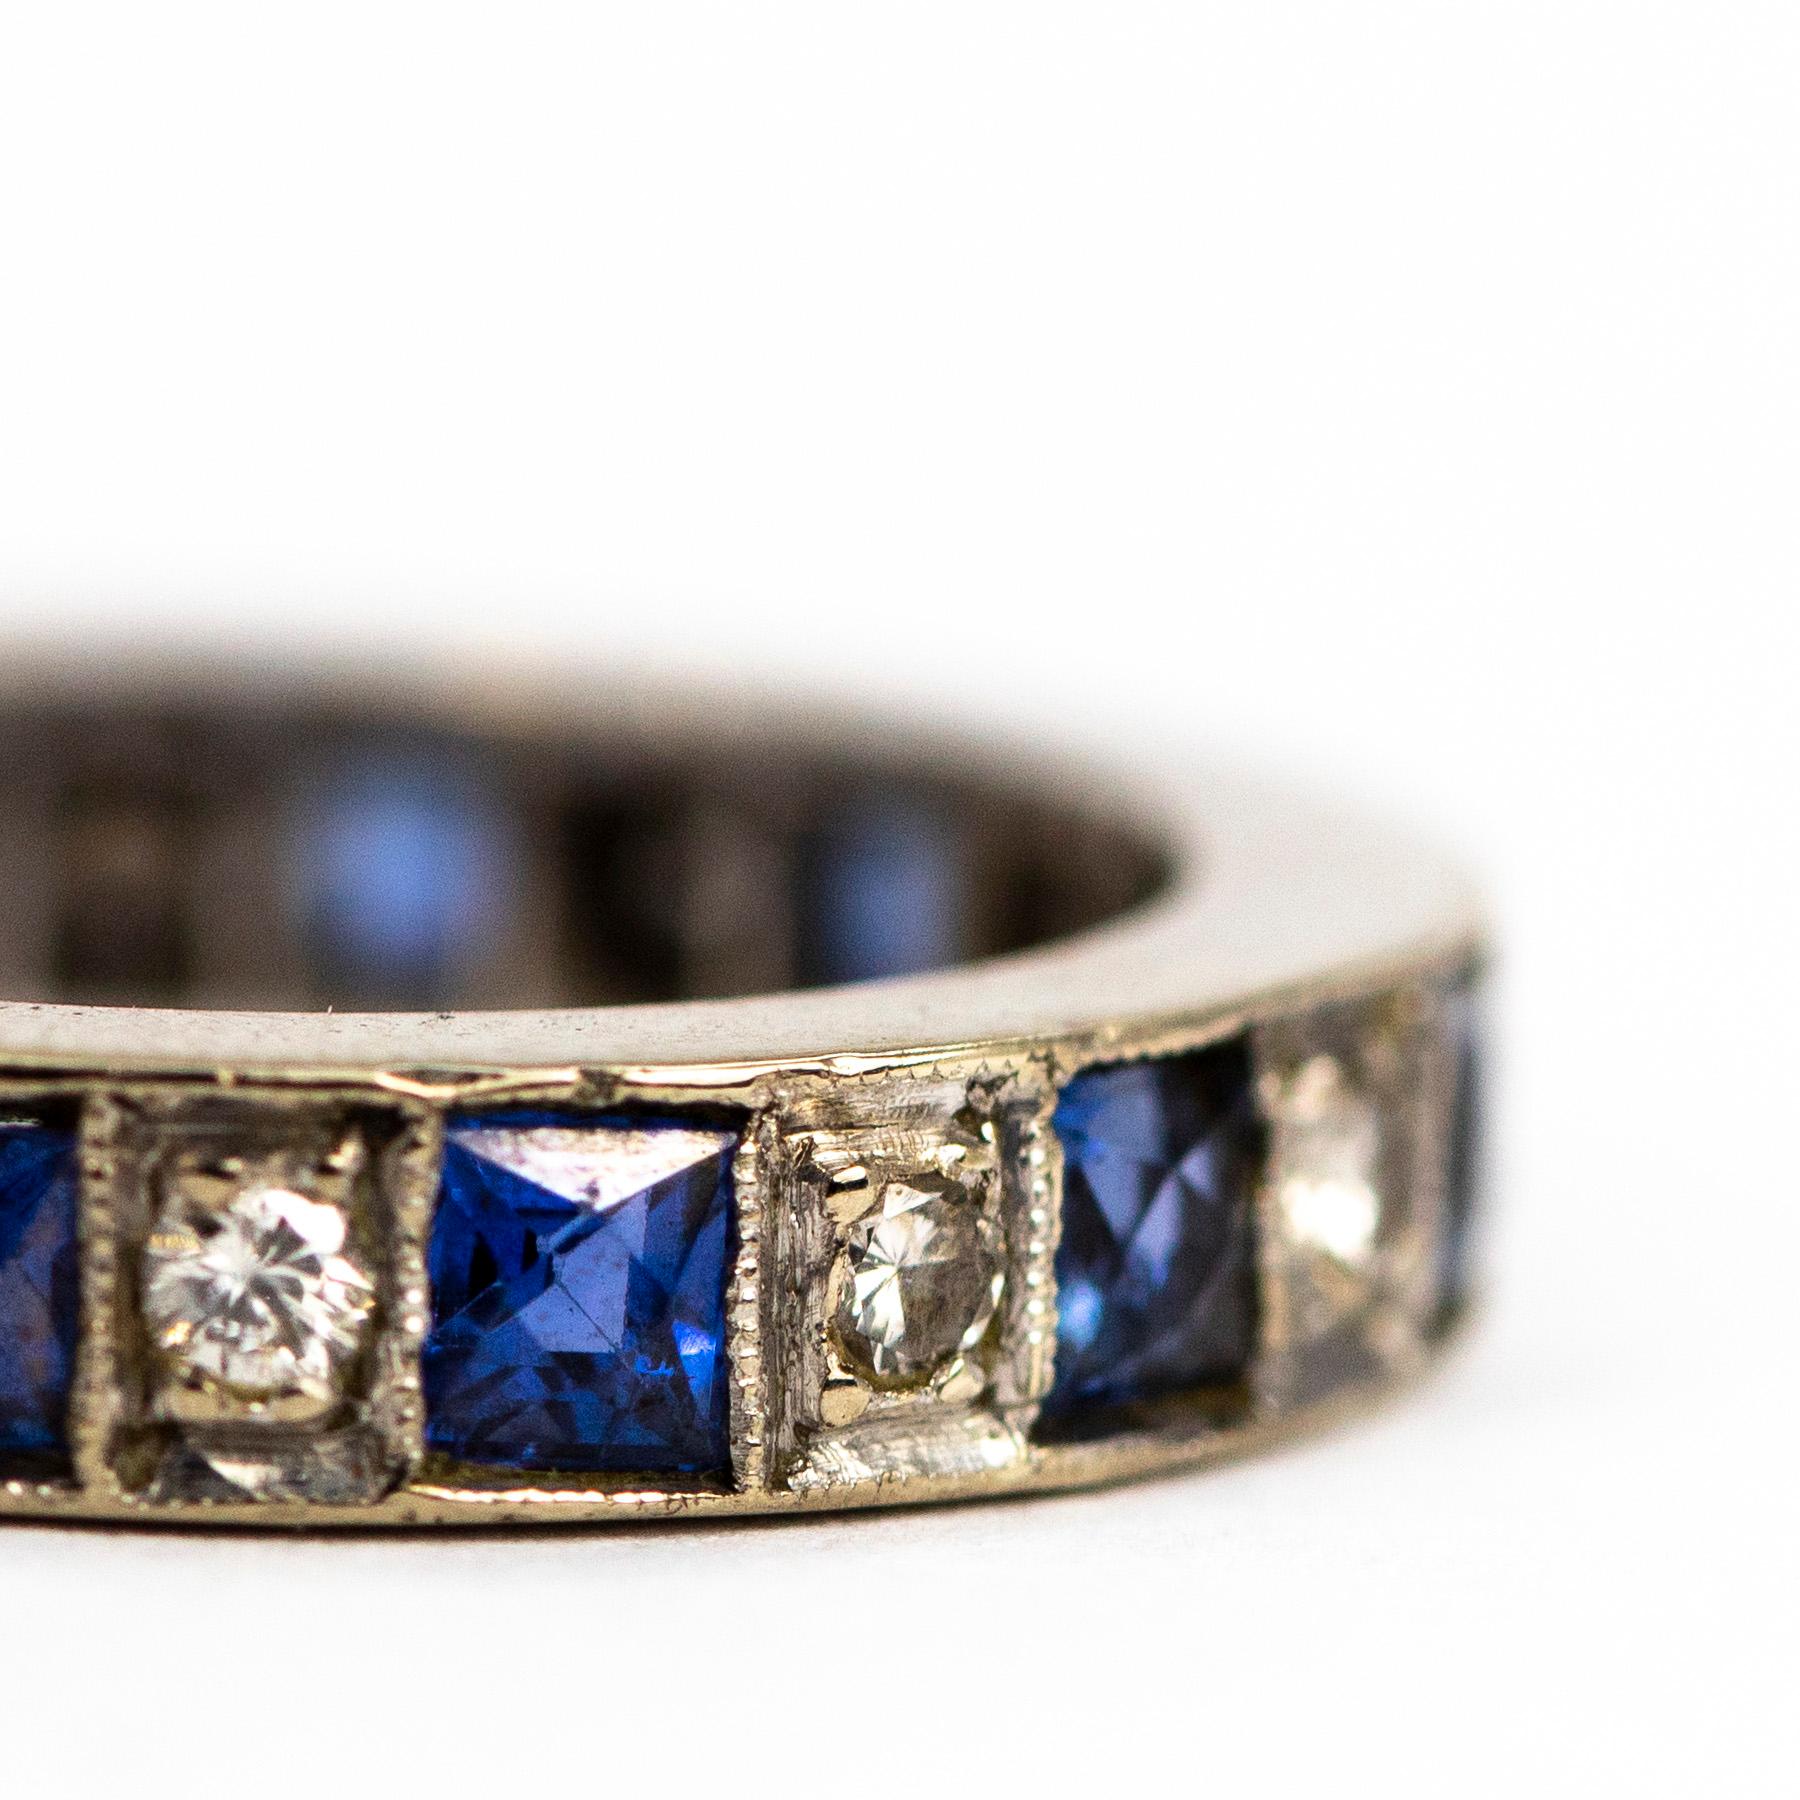 This eternity band is chunky and features sapphires and diamonds all the way around. The sapphires measure 30pts each and the diamonds measure 5pts each. The diamonds are round cut and set in square settings and sapphires are square cut. 

Ring